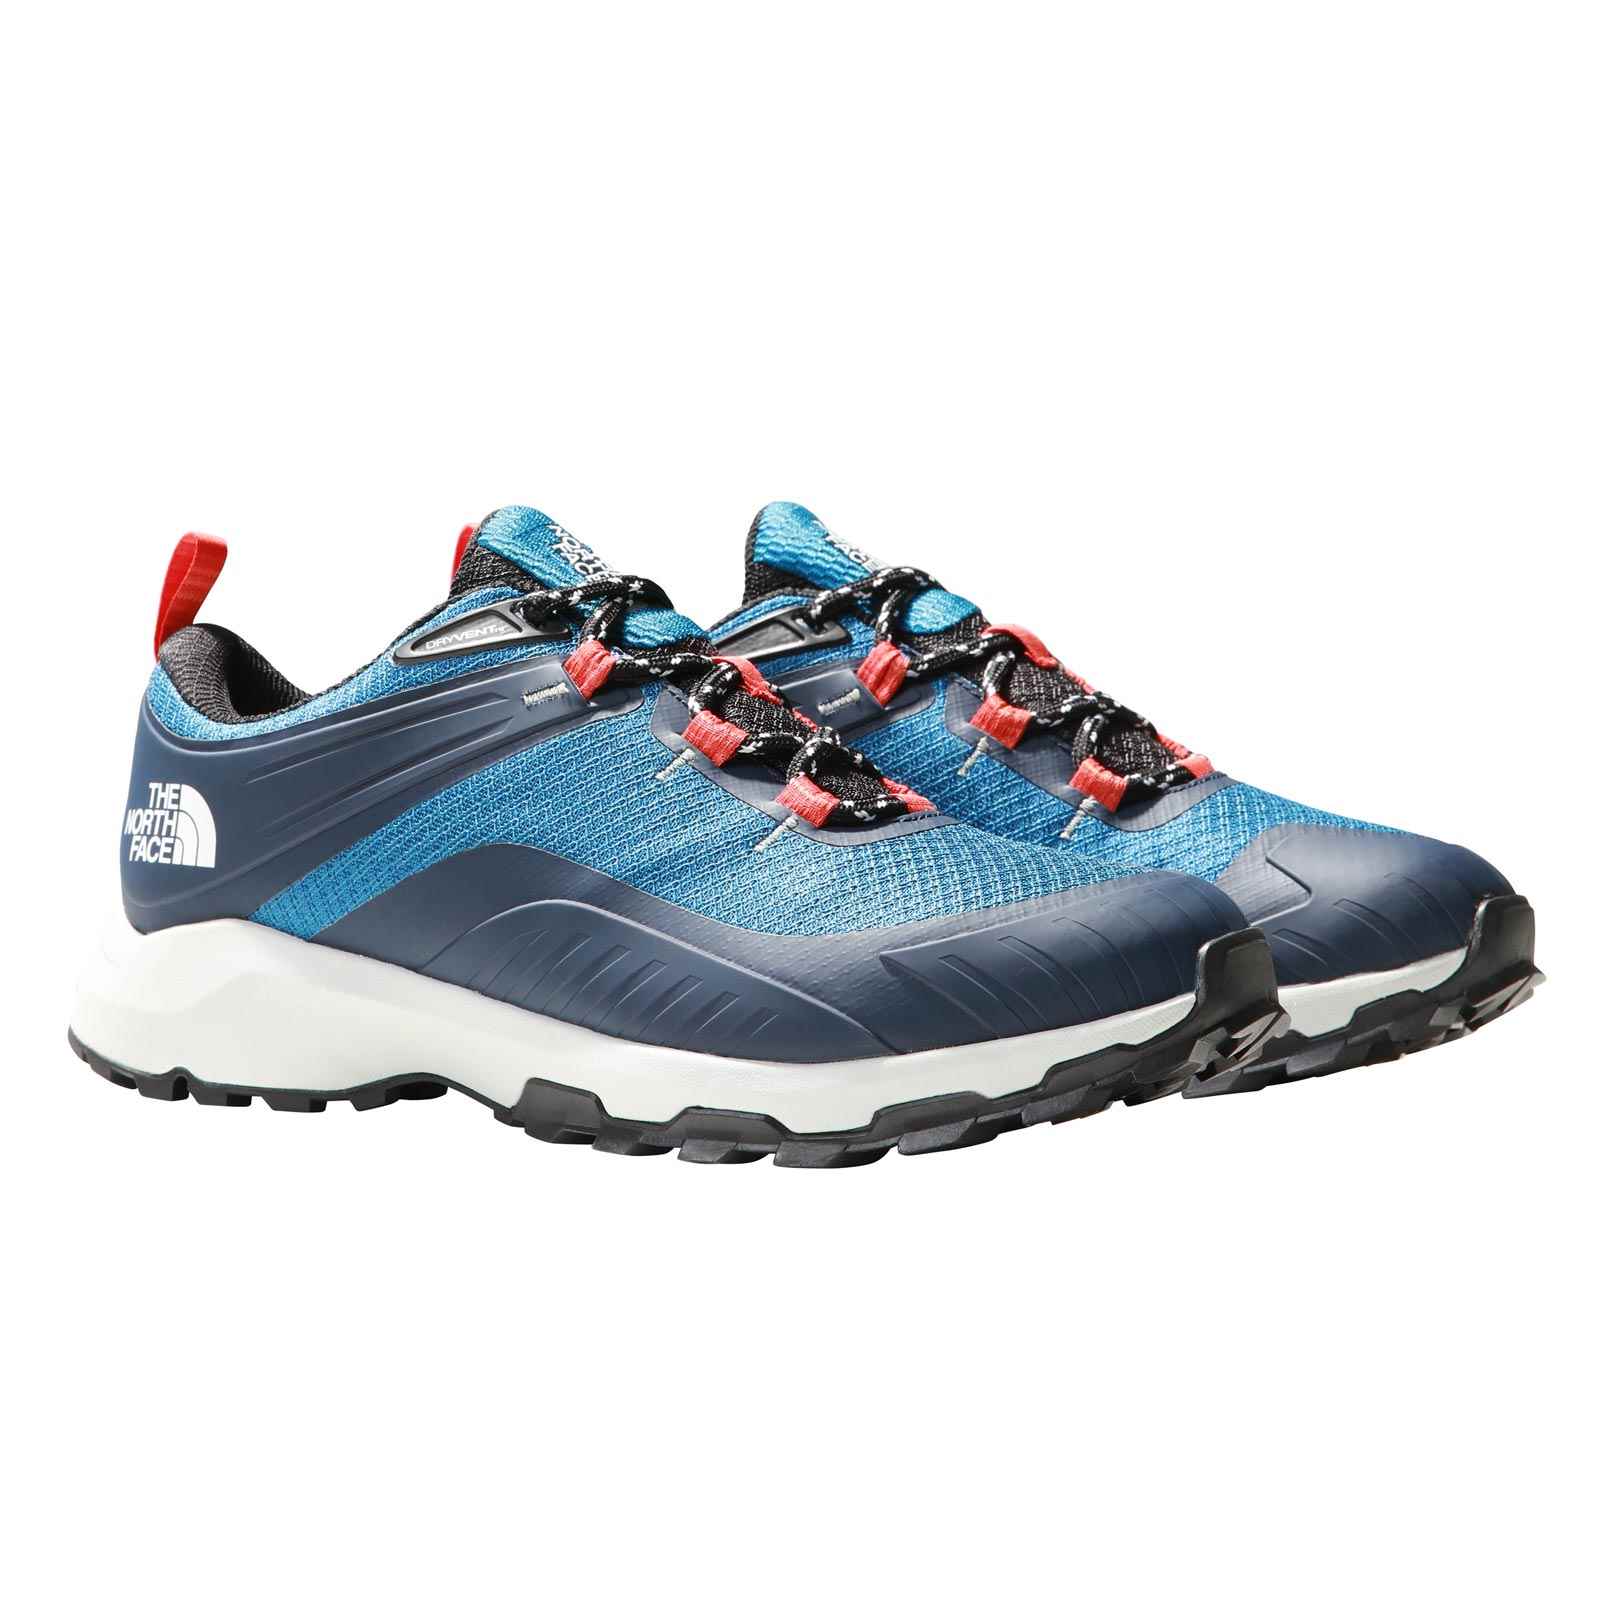 THE NORTH FACE CRAGMONT WOMENS WATERPROOF HIKING SHOES